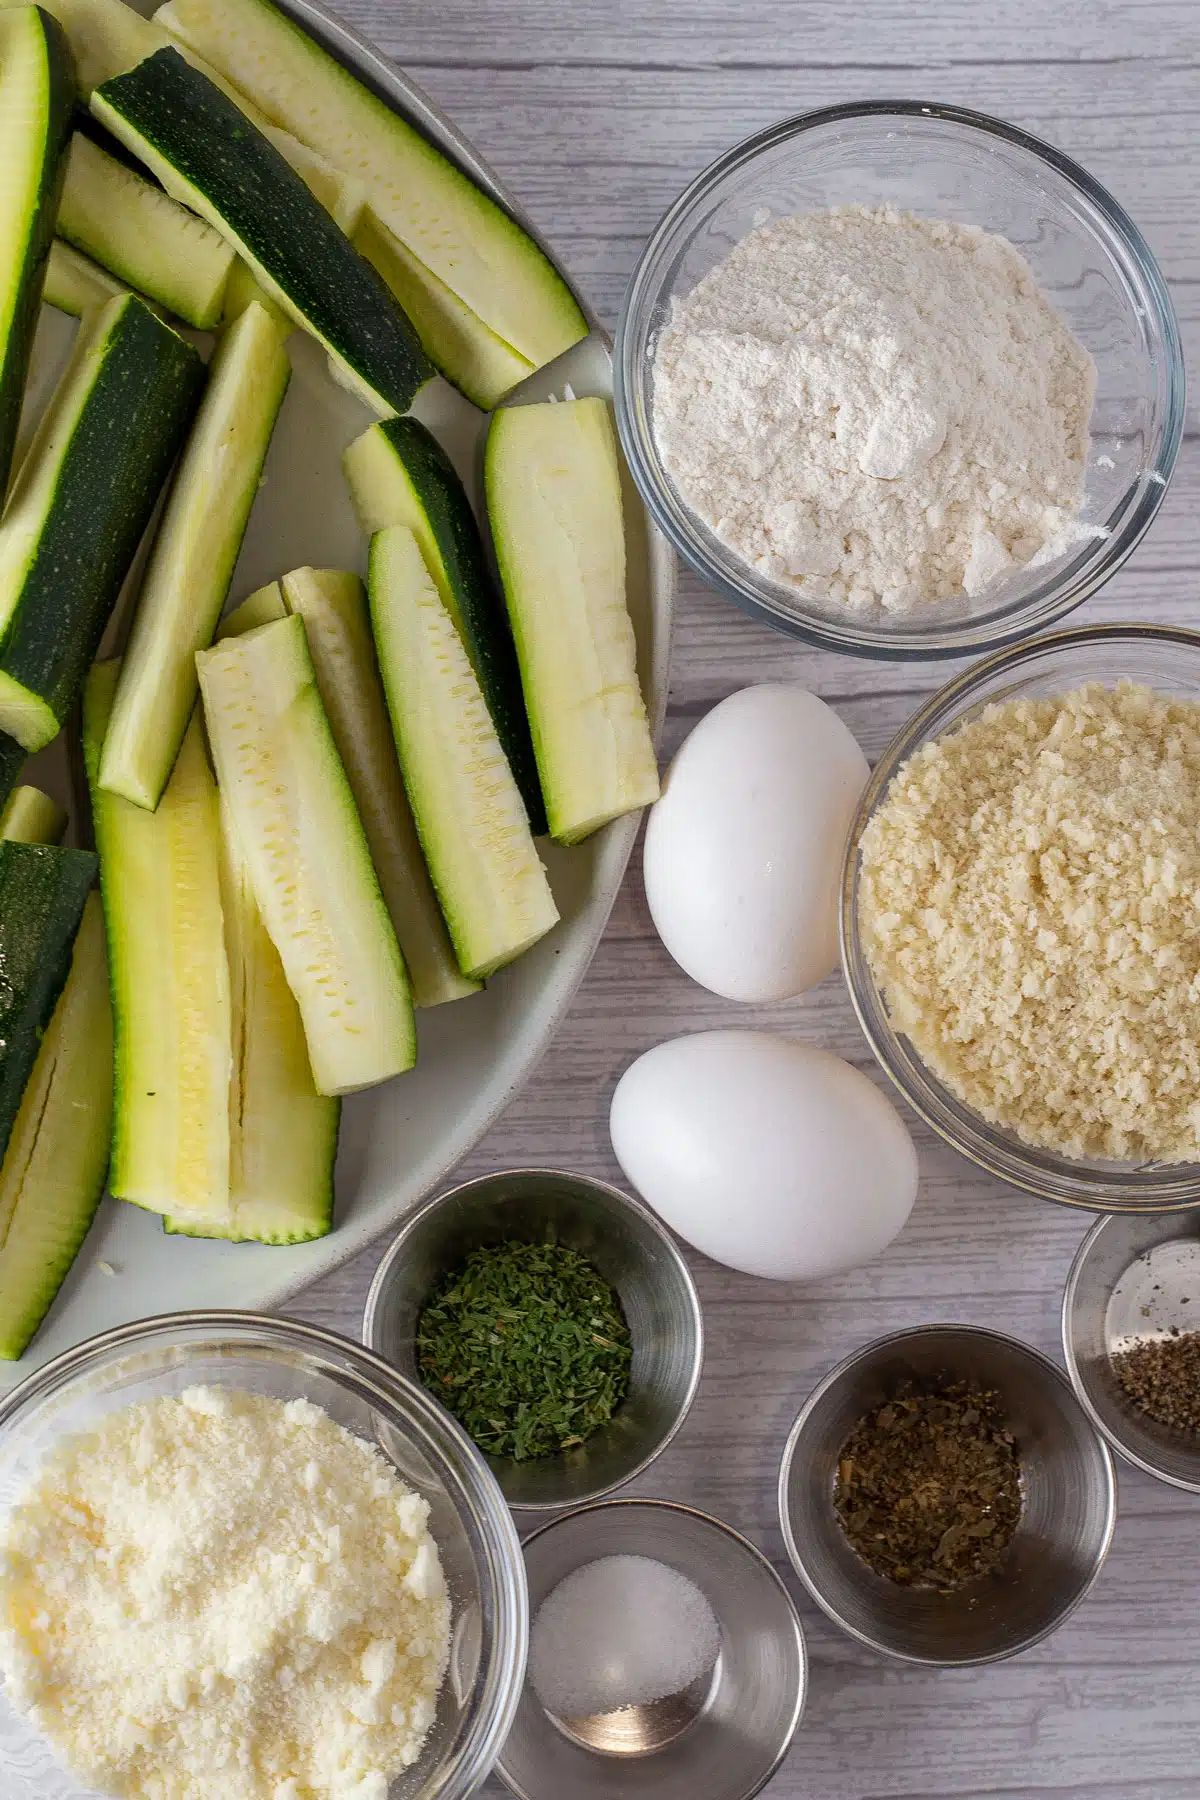 Tall image showing air fryer zucchini ingredients.